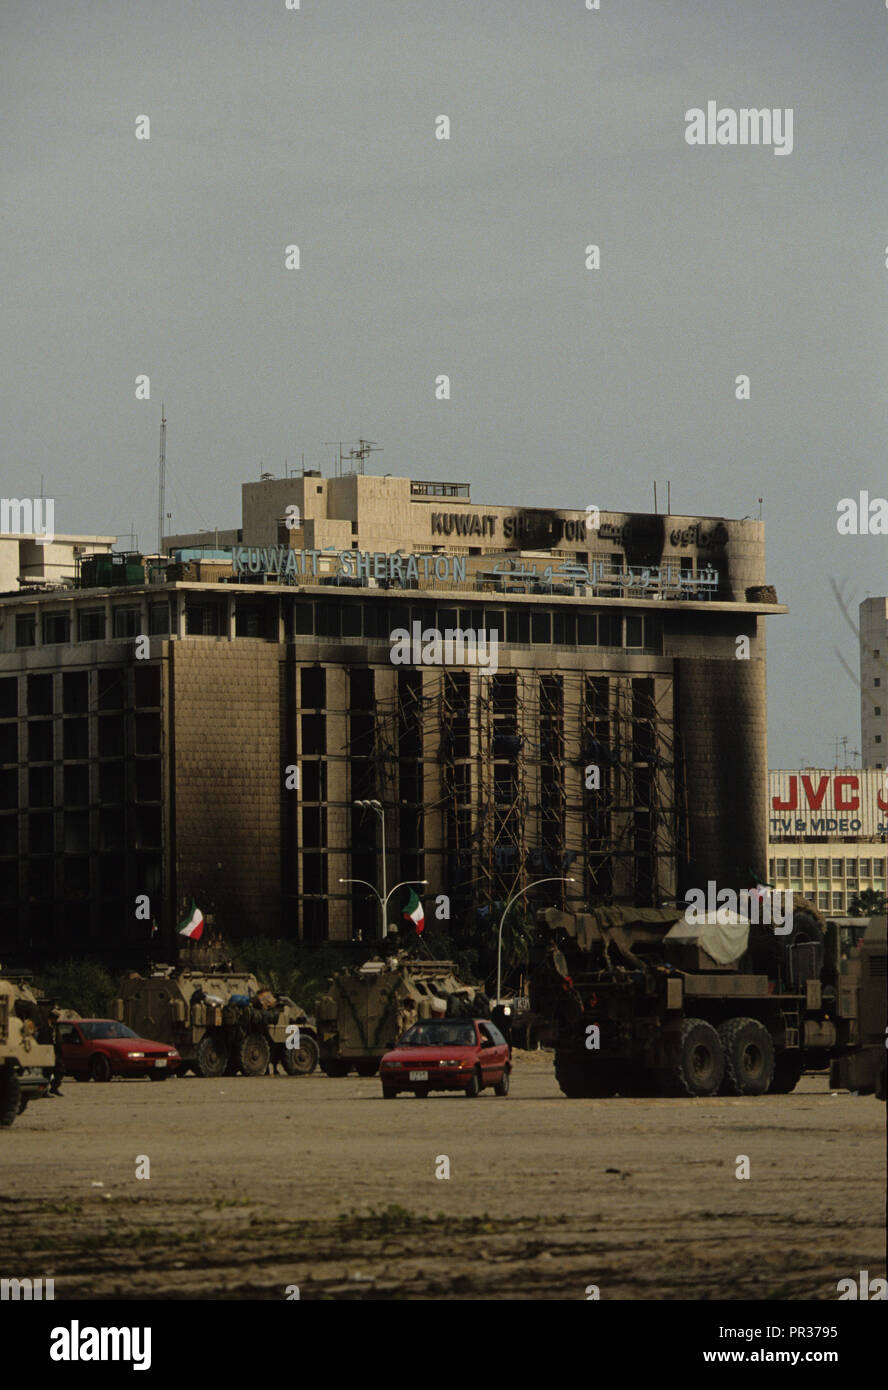 The Sheraton Hotel in Kuwait City during the first days of liberation during the first Gulf War  Photograph by Dennis Brack bb24 Stock Photo